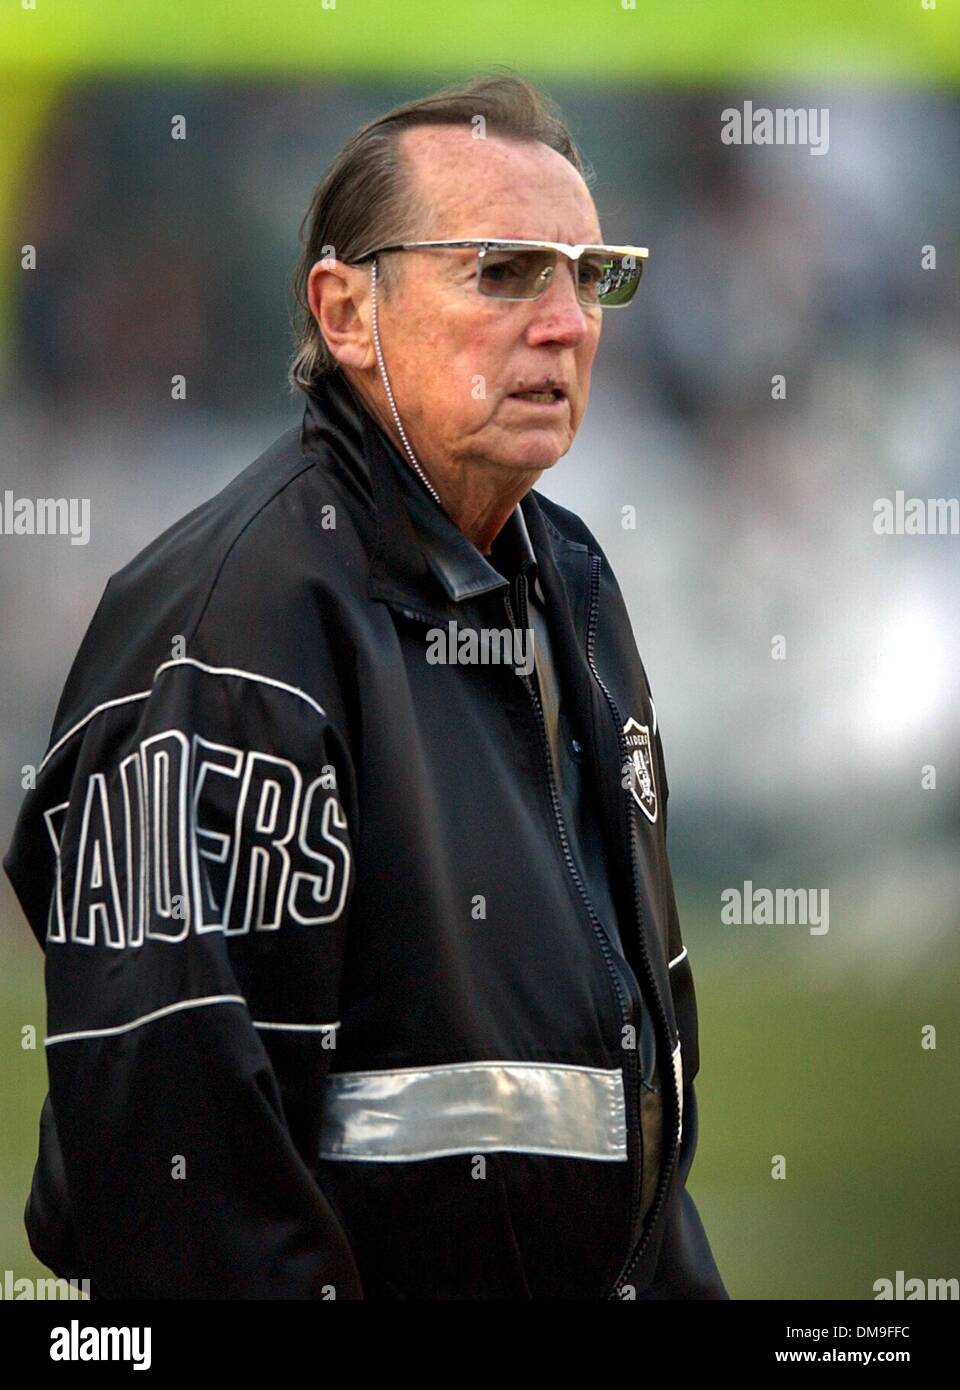 Oakland Raiders owner, Al Davis, seen here on the sidelines prior to a wild  card playoff game against the New York Jets at Network Associates Coliseum  in Oakland, CA. on Saturday, January